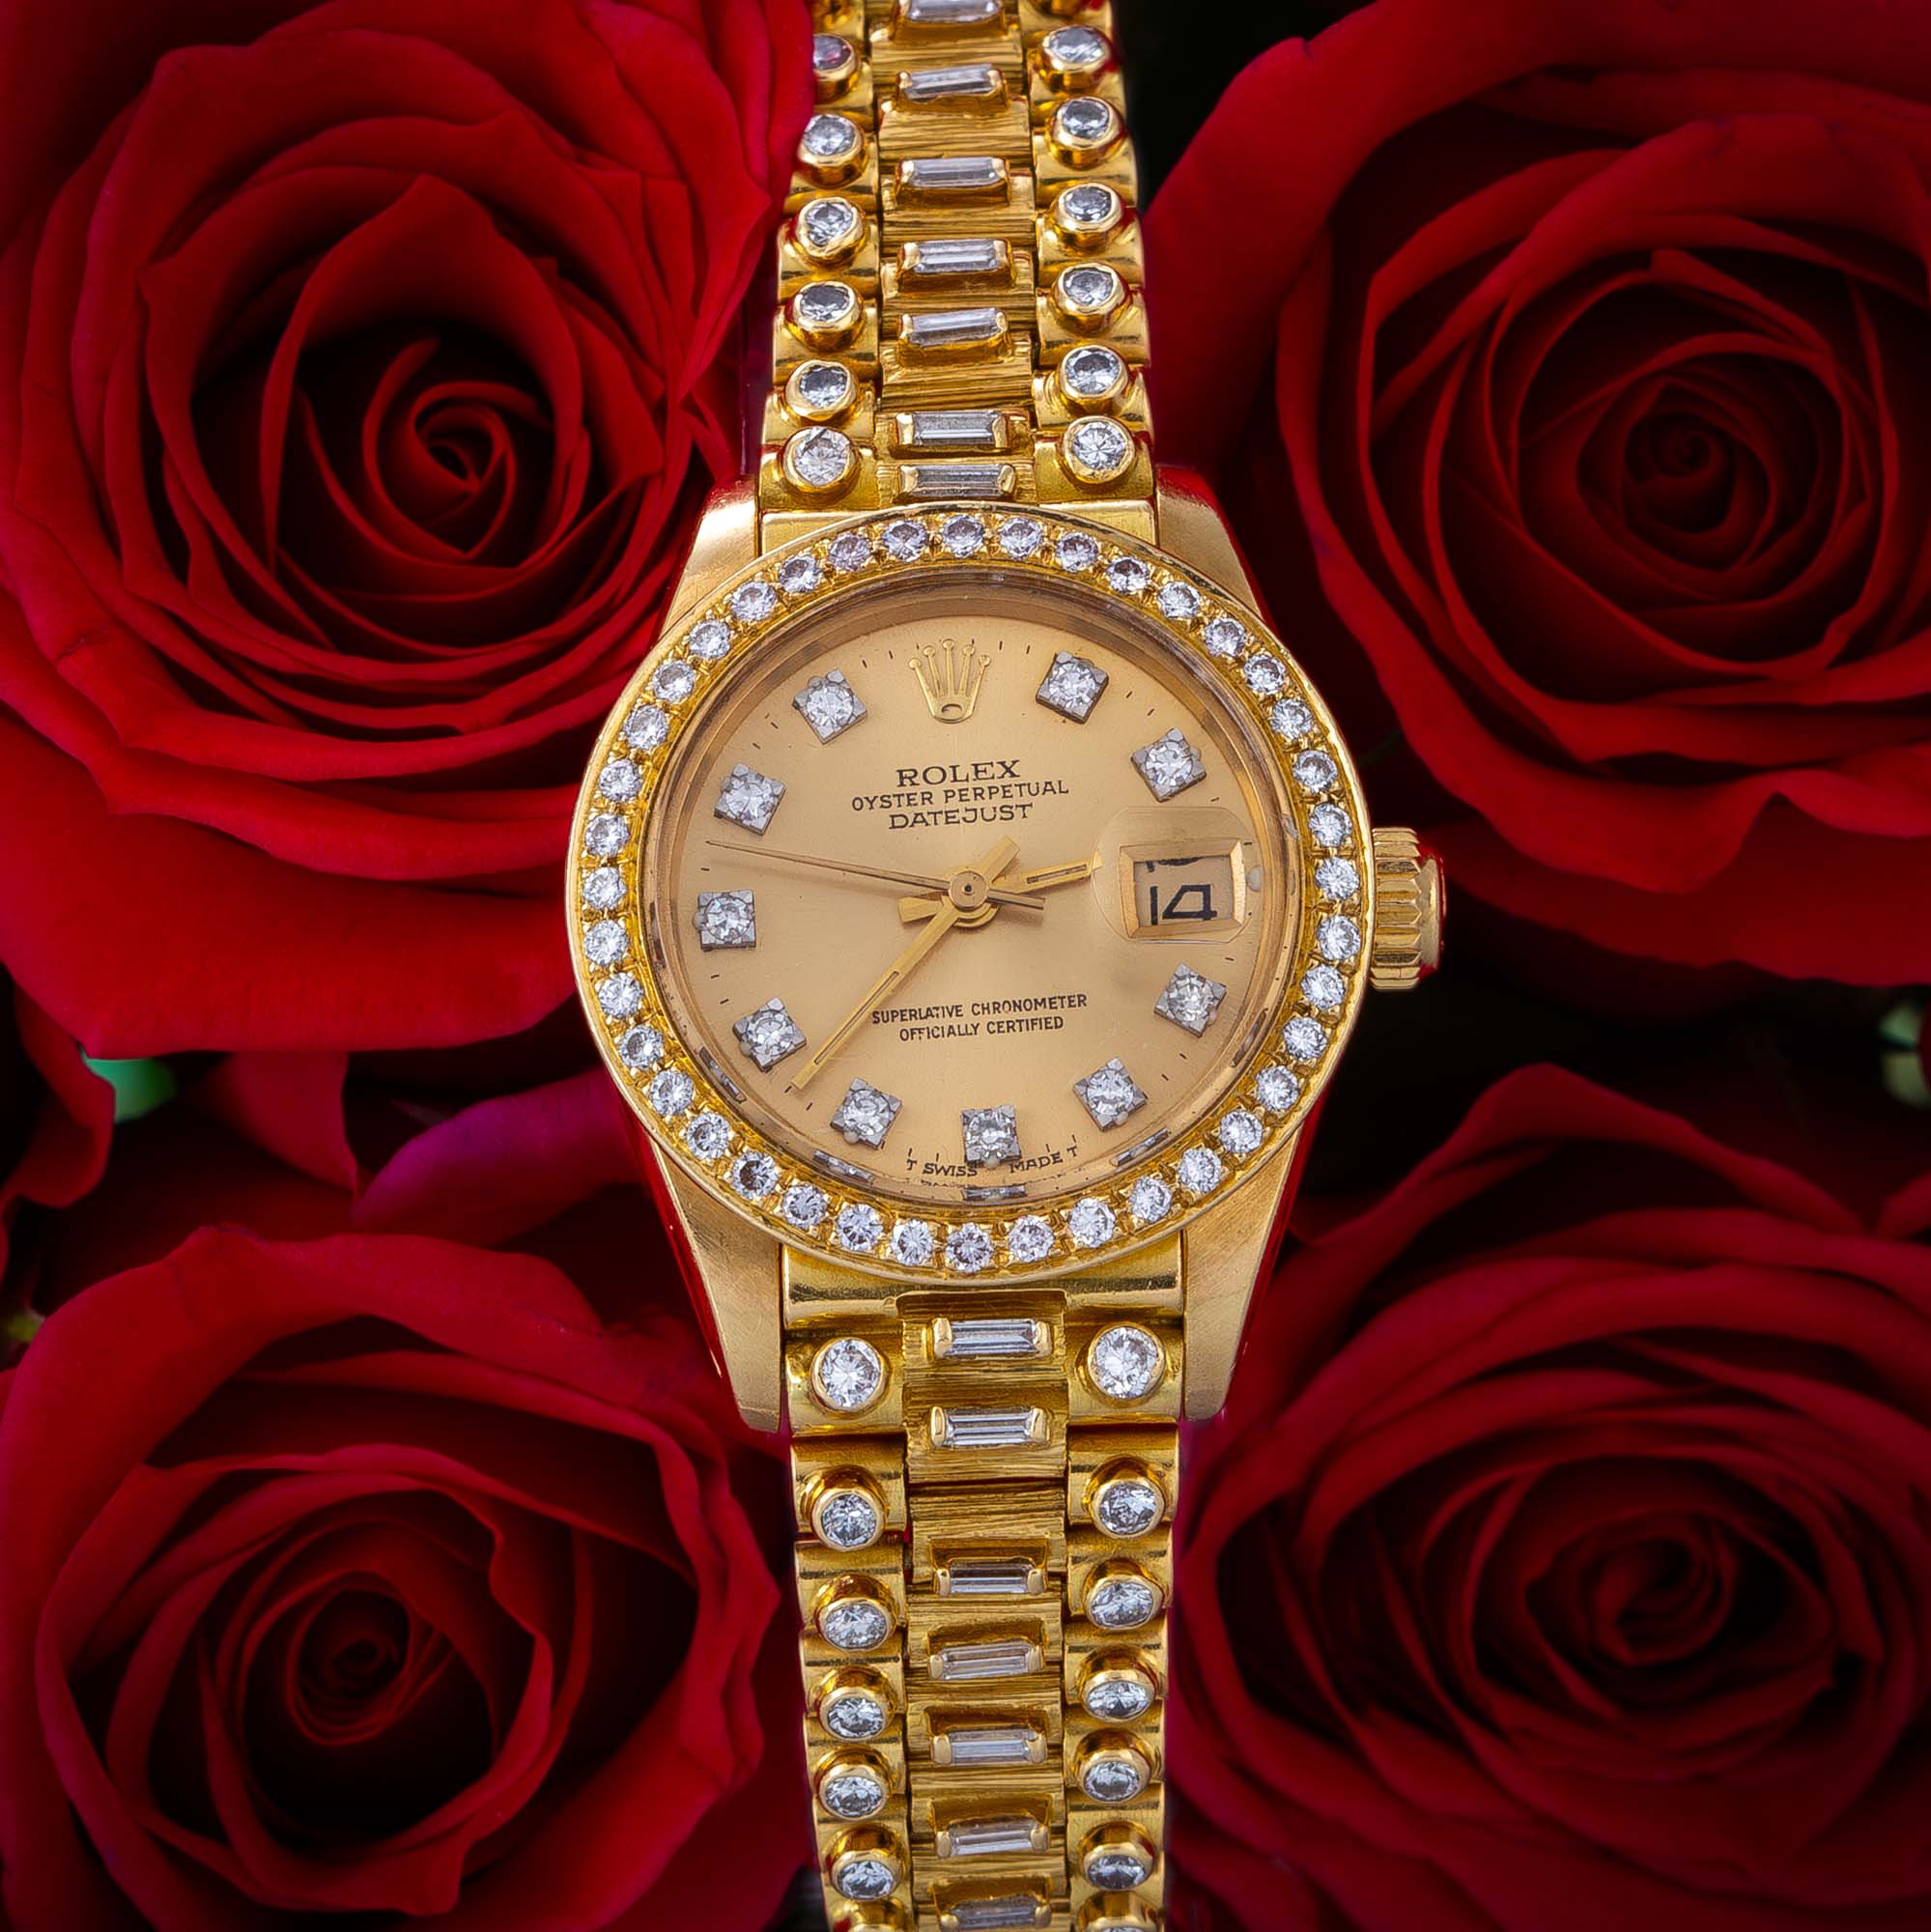 Luxury Watches | Rolex, Omega & More